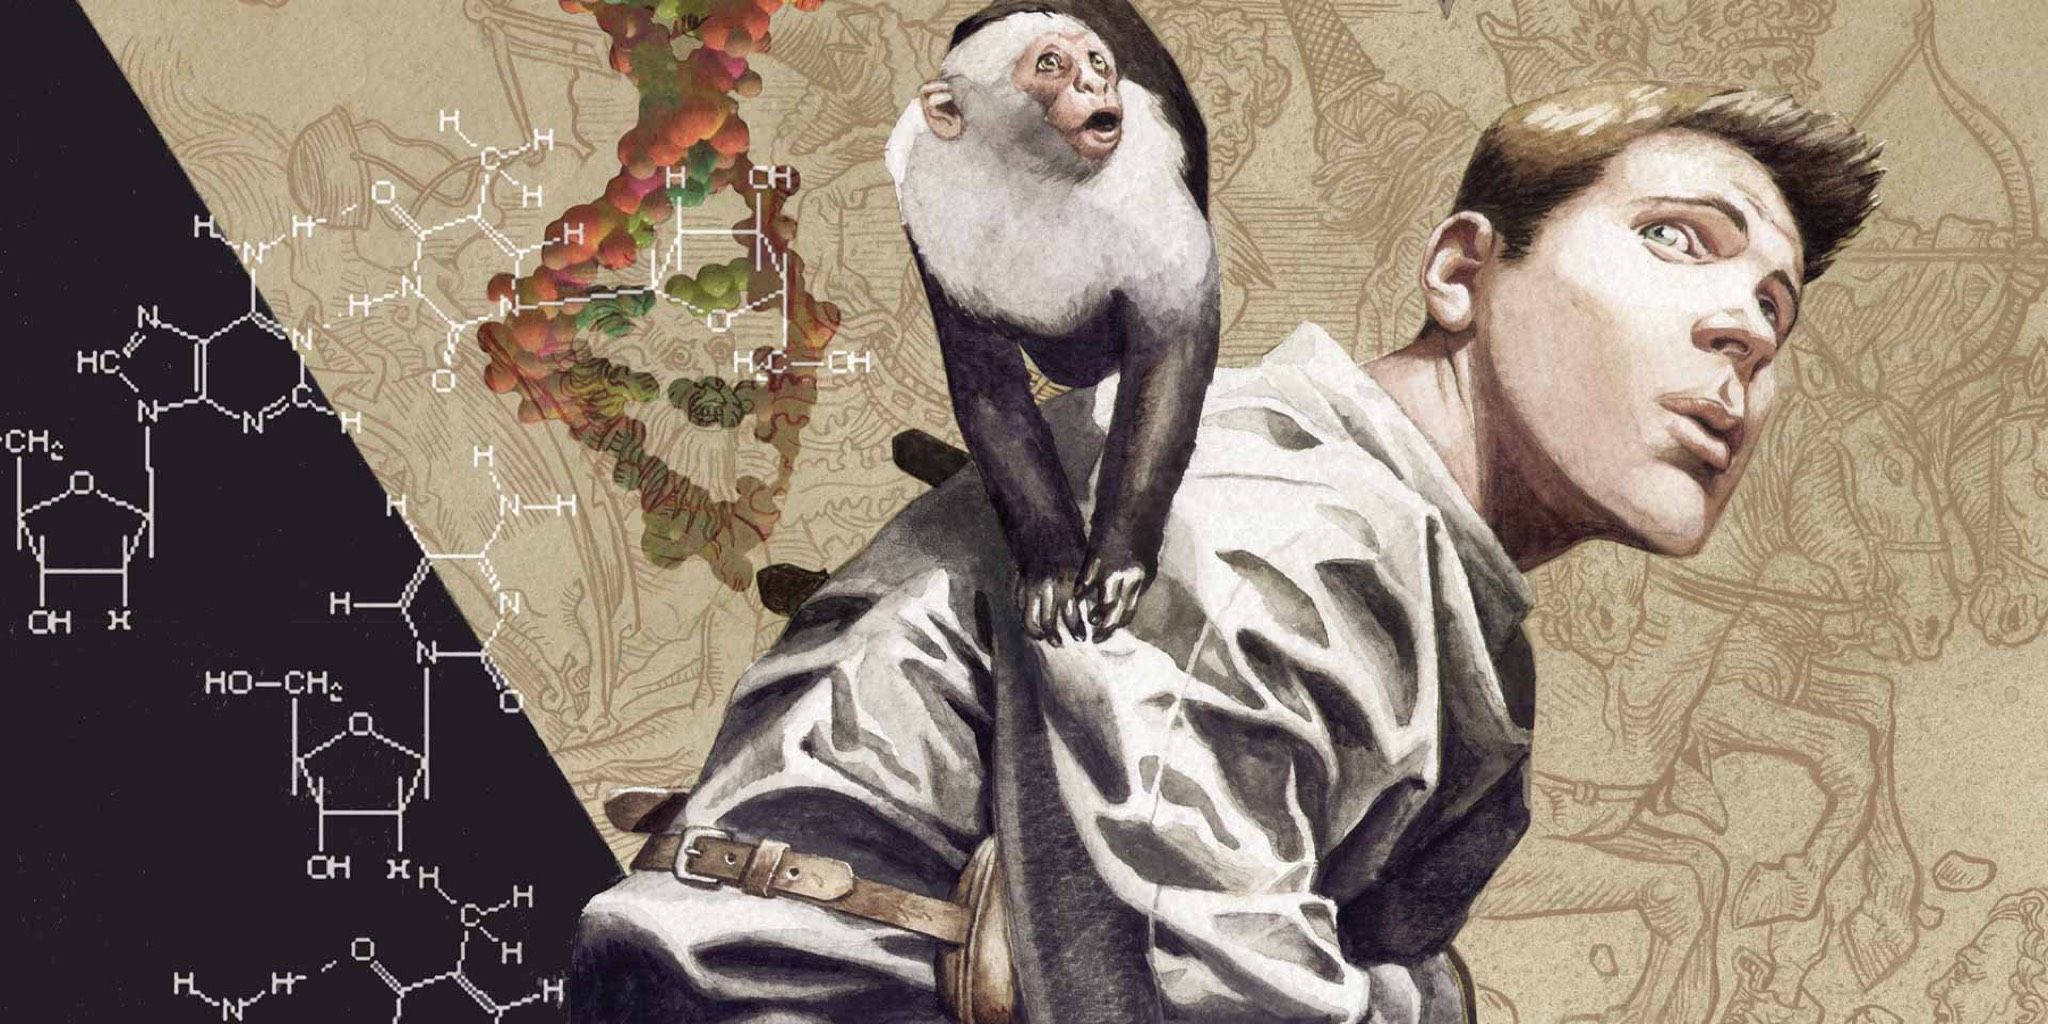 Cover to Y: The Last Man featuring Yorick and Ampersand.